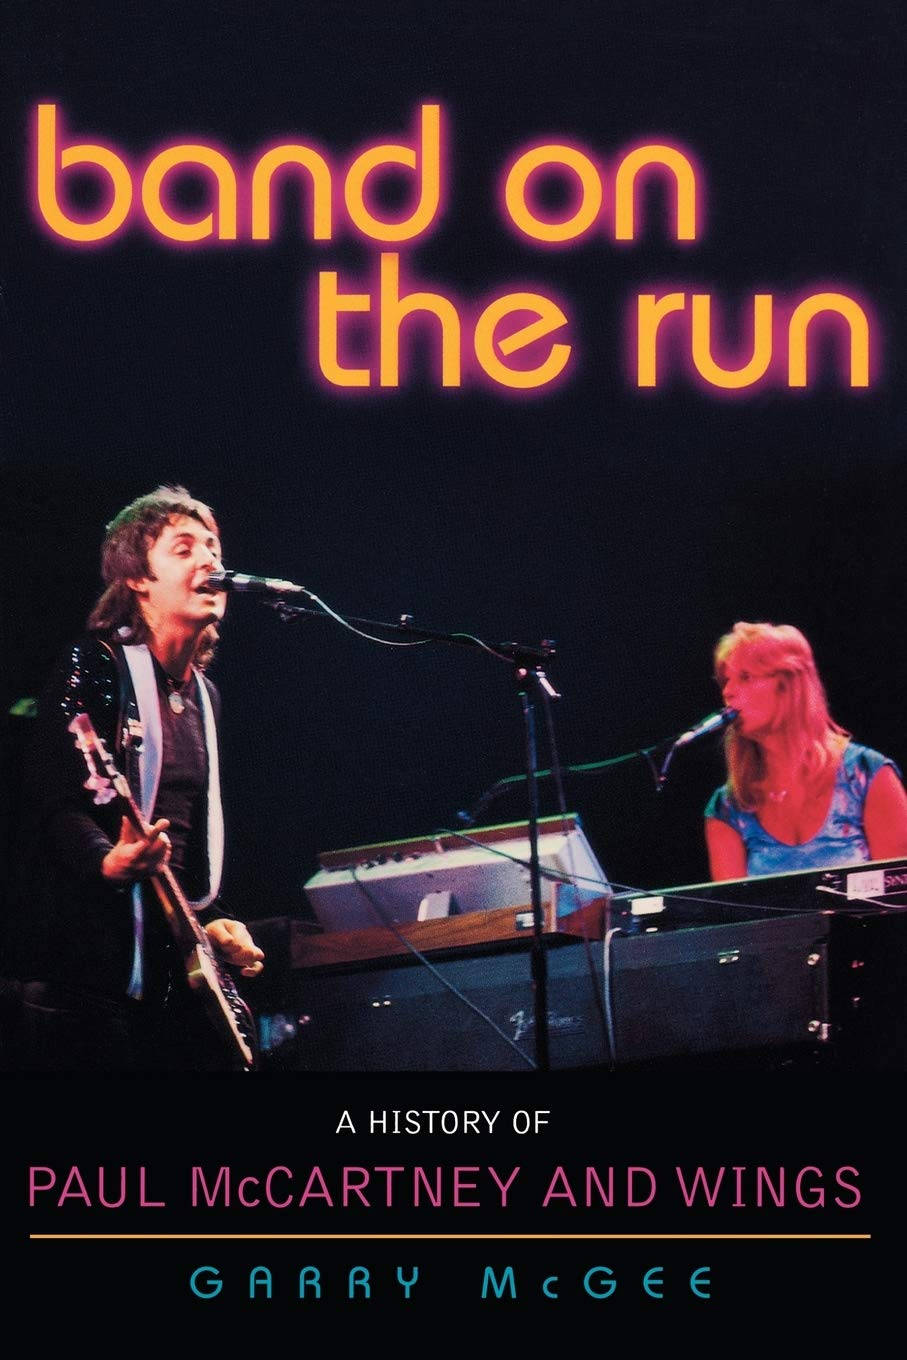 Paul Mccartney And Wings Band On The Run Book Background